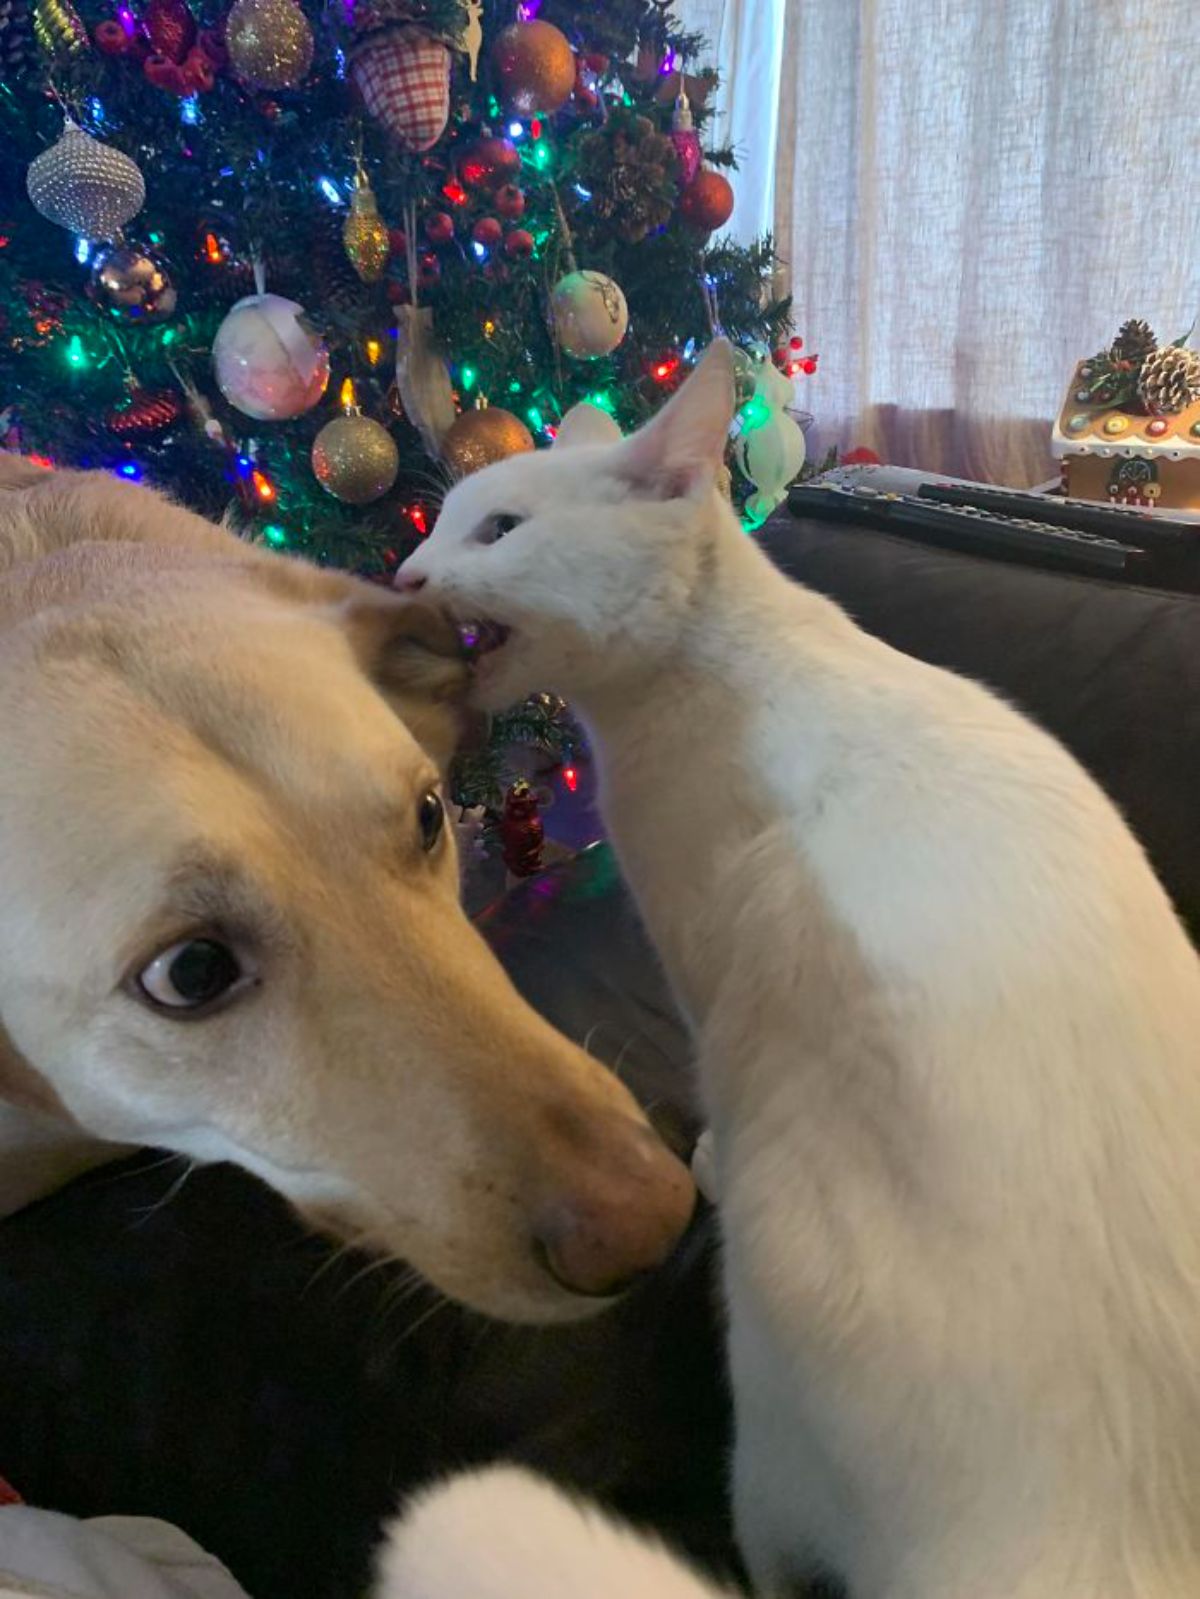 white cat biting a brown dog's ear